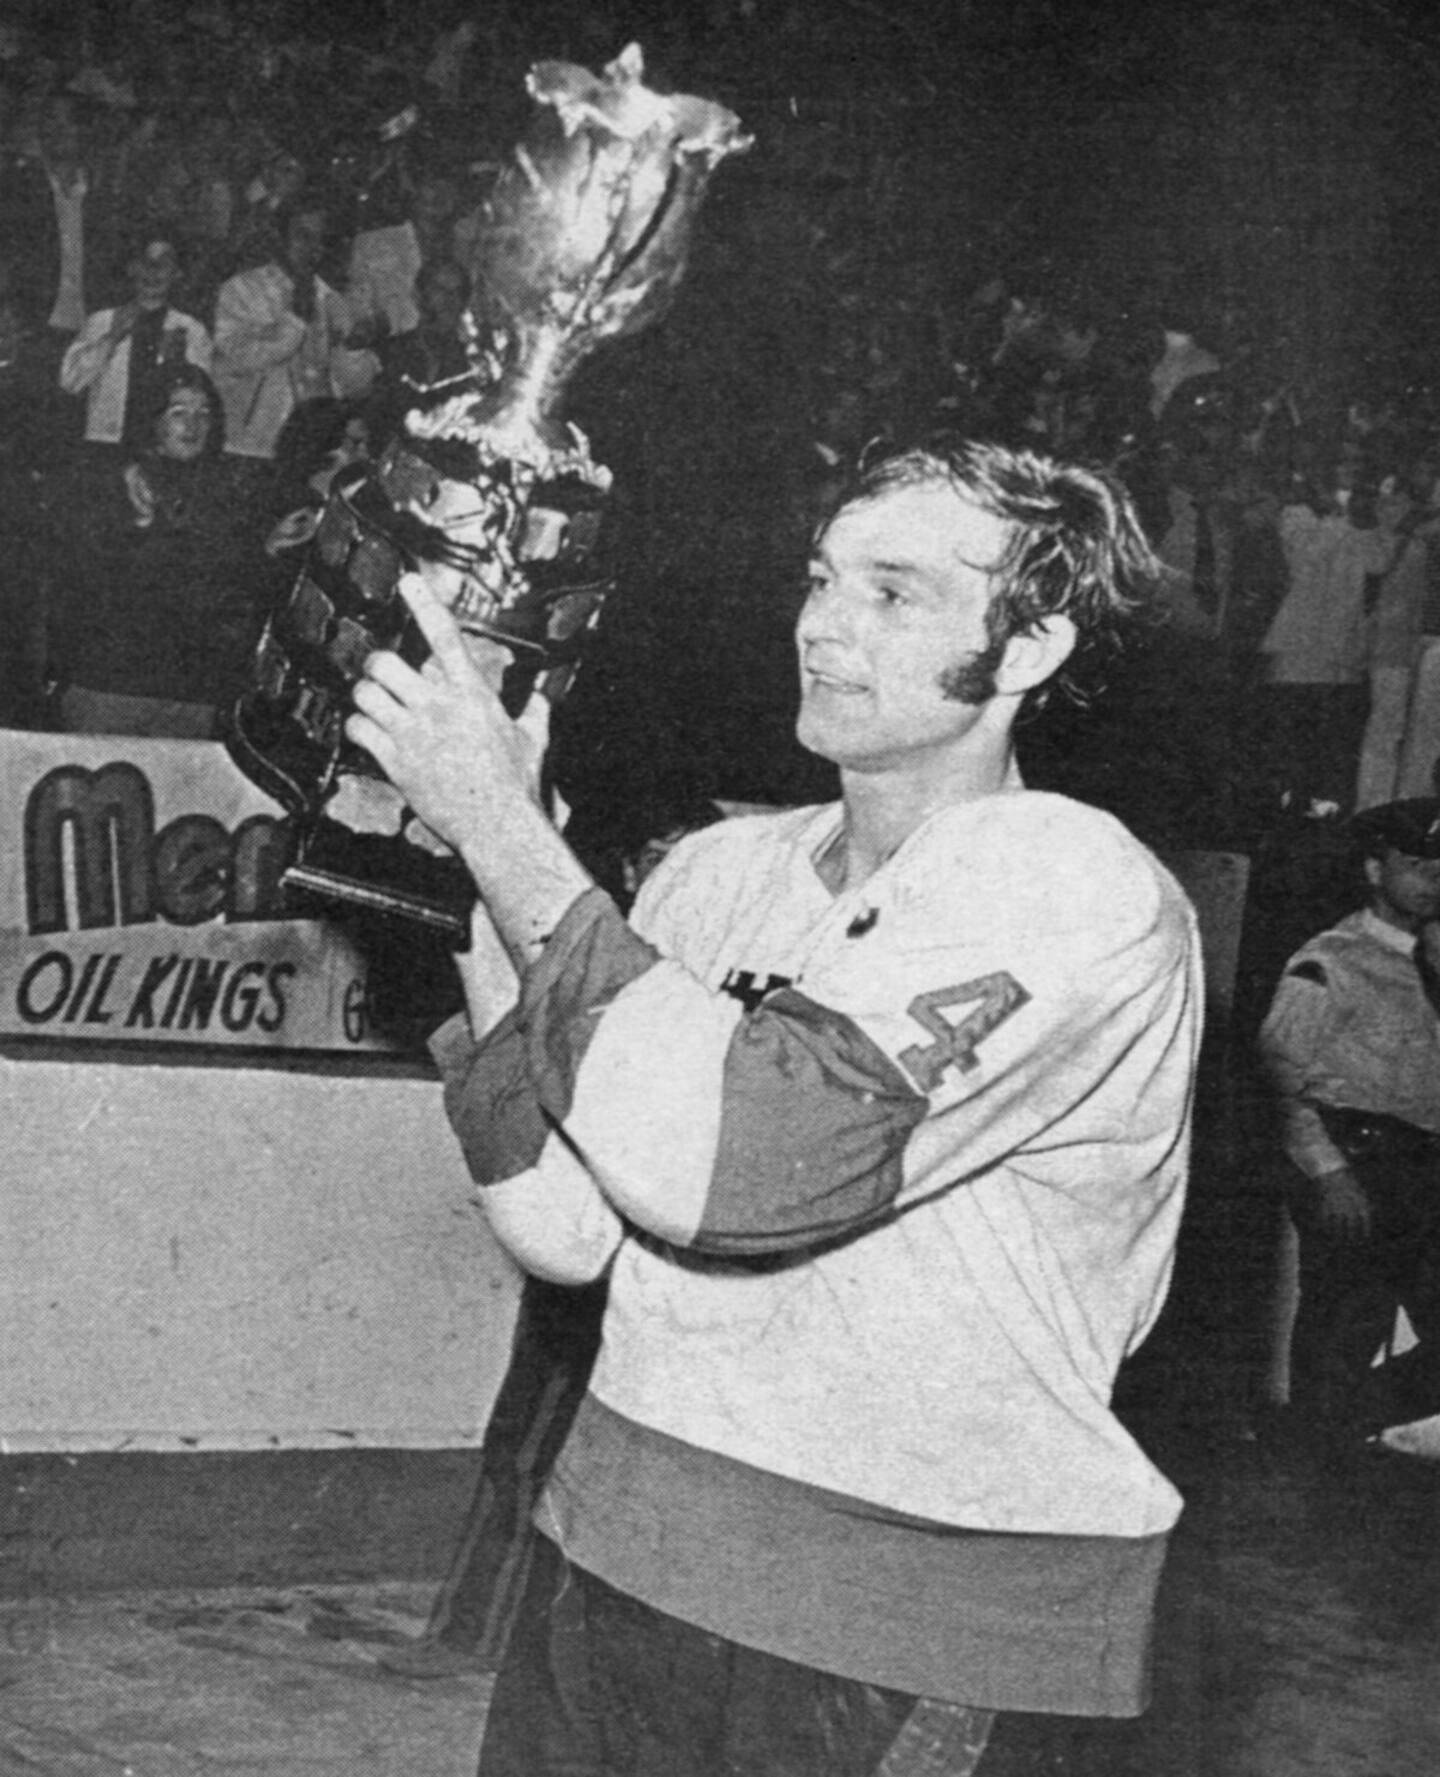 QMJHL: a final dedicated to the memory of Guy Lafleur